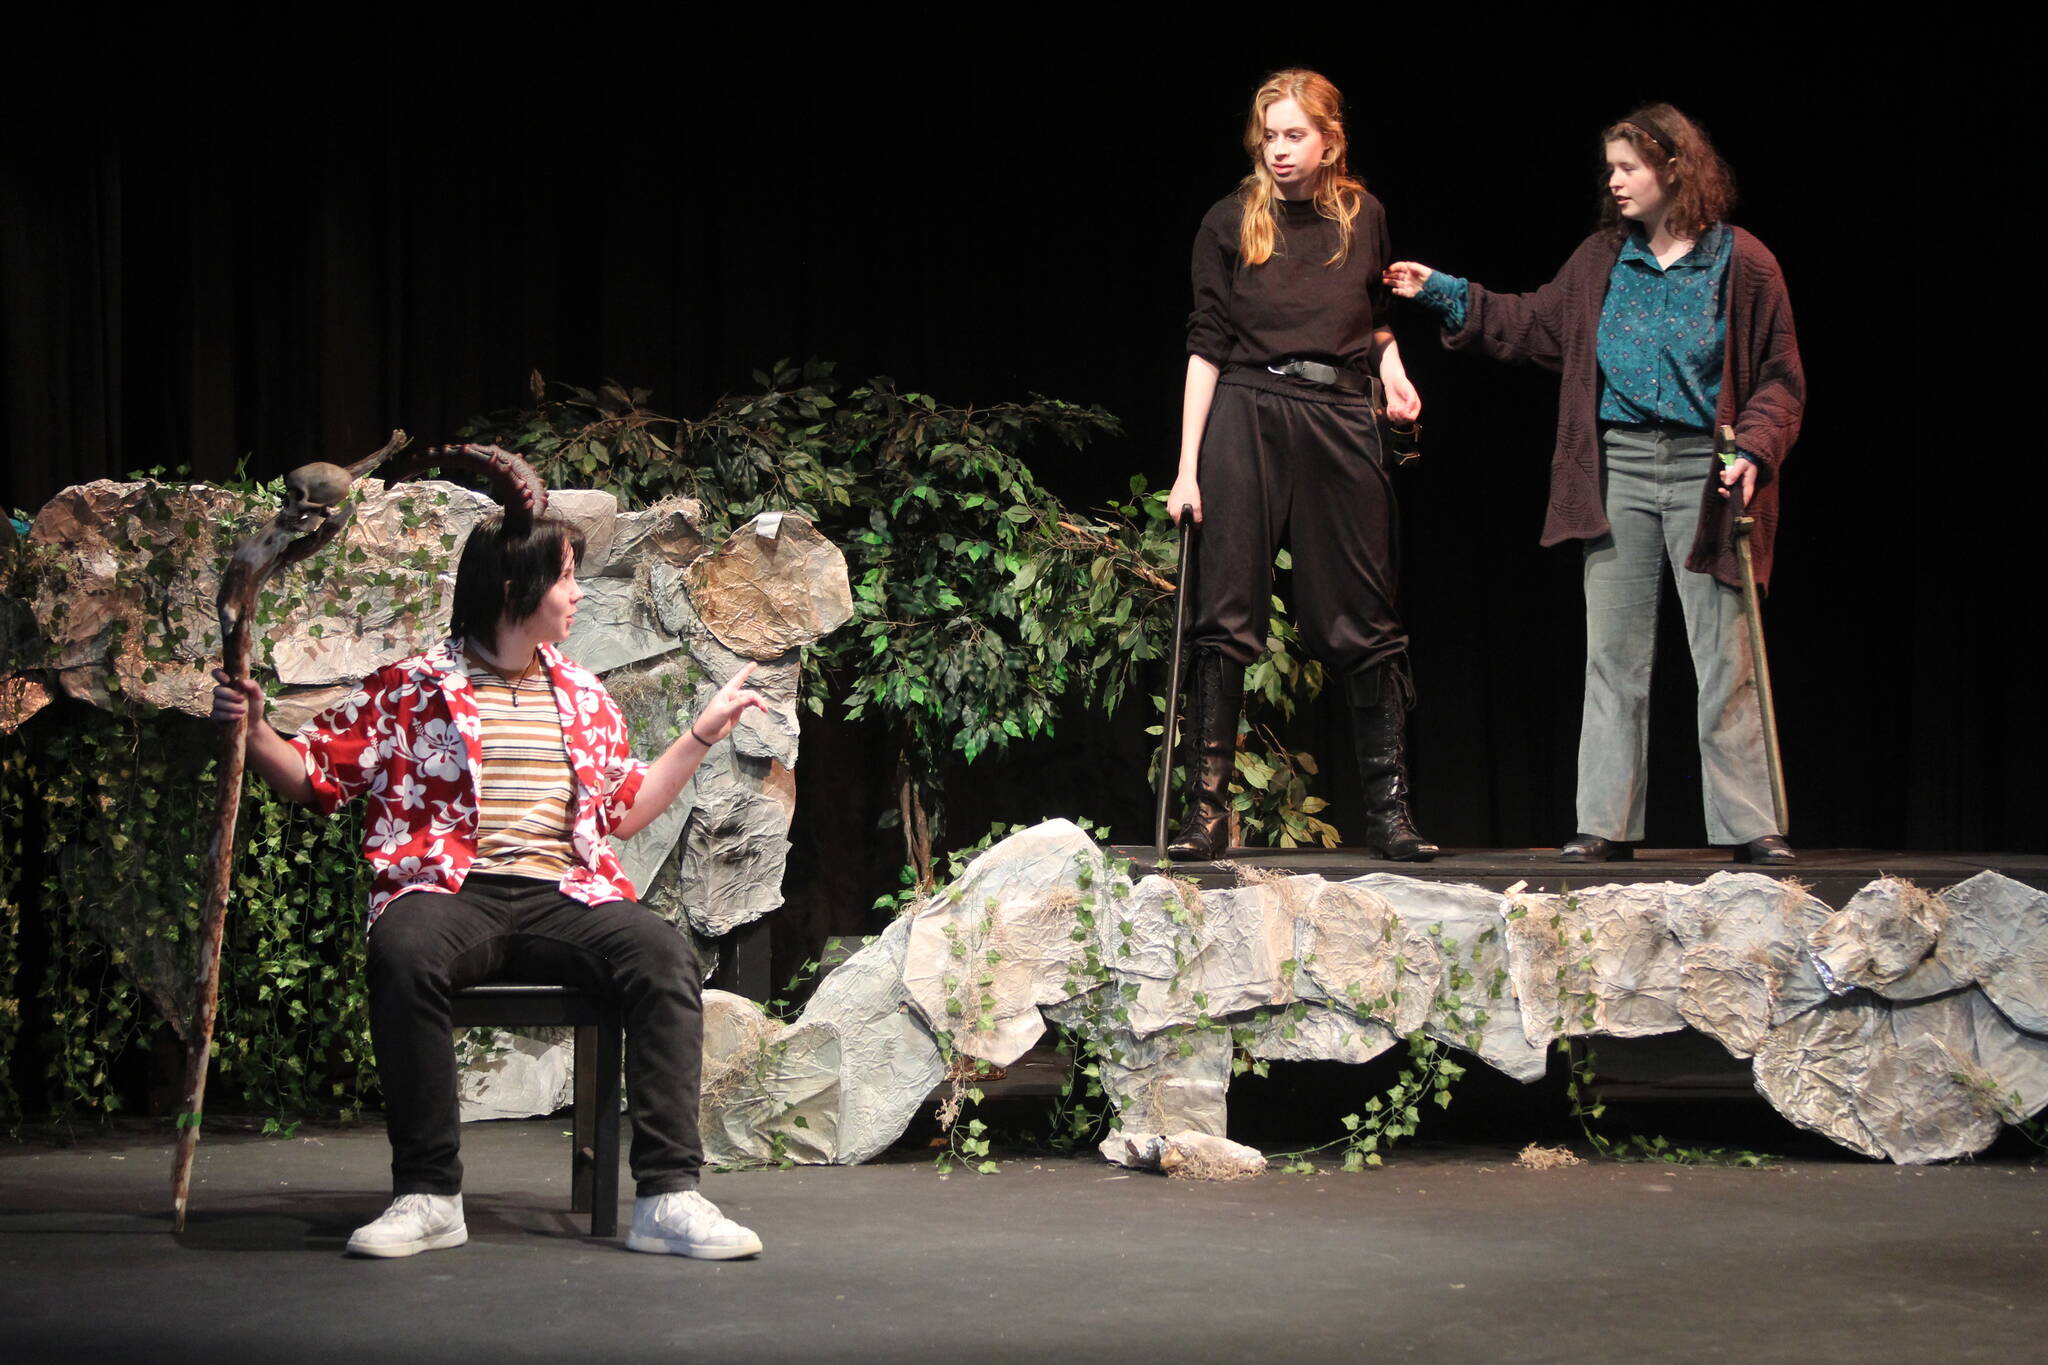 Photo by Karina Andrew/Whidbey News-Times
From left, Milo Socha, Wynter Arndt and Birdie Sinclair rehearse a scene from “She Kills Monsters.”